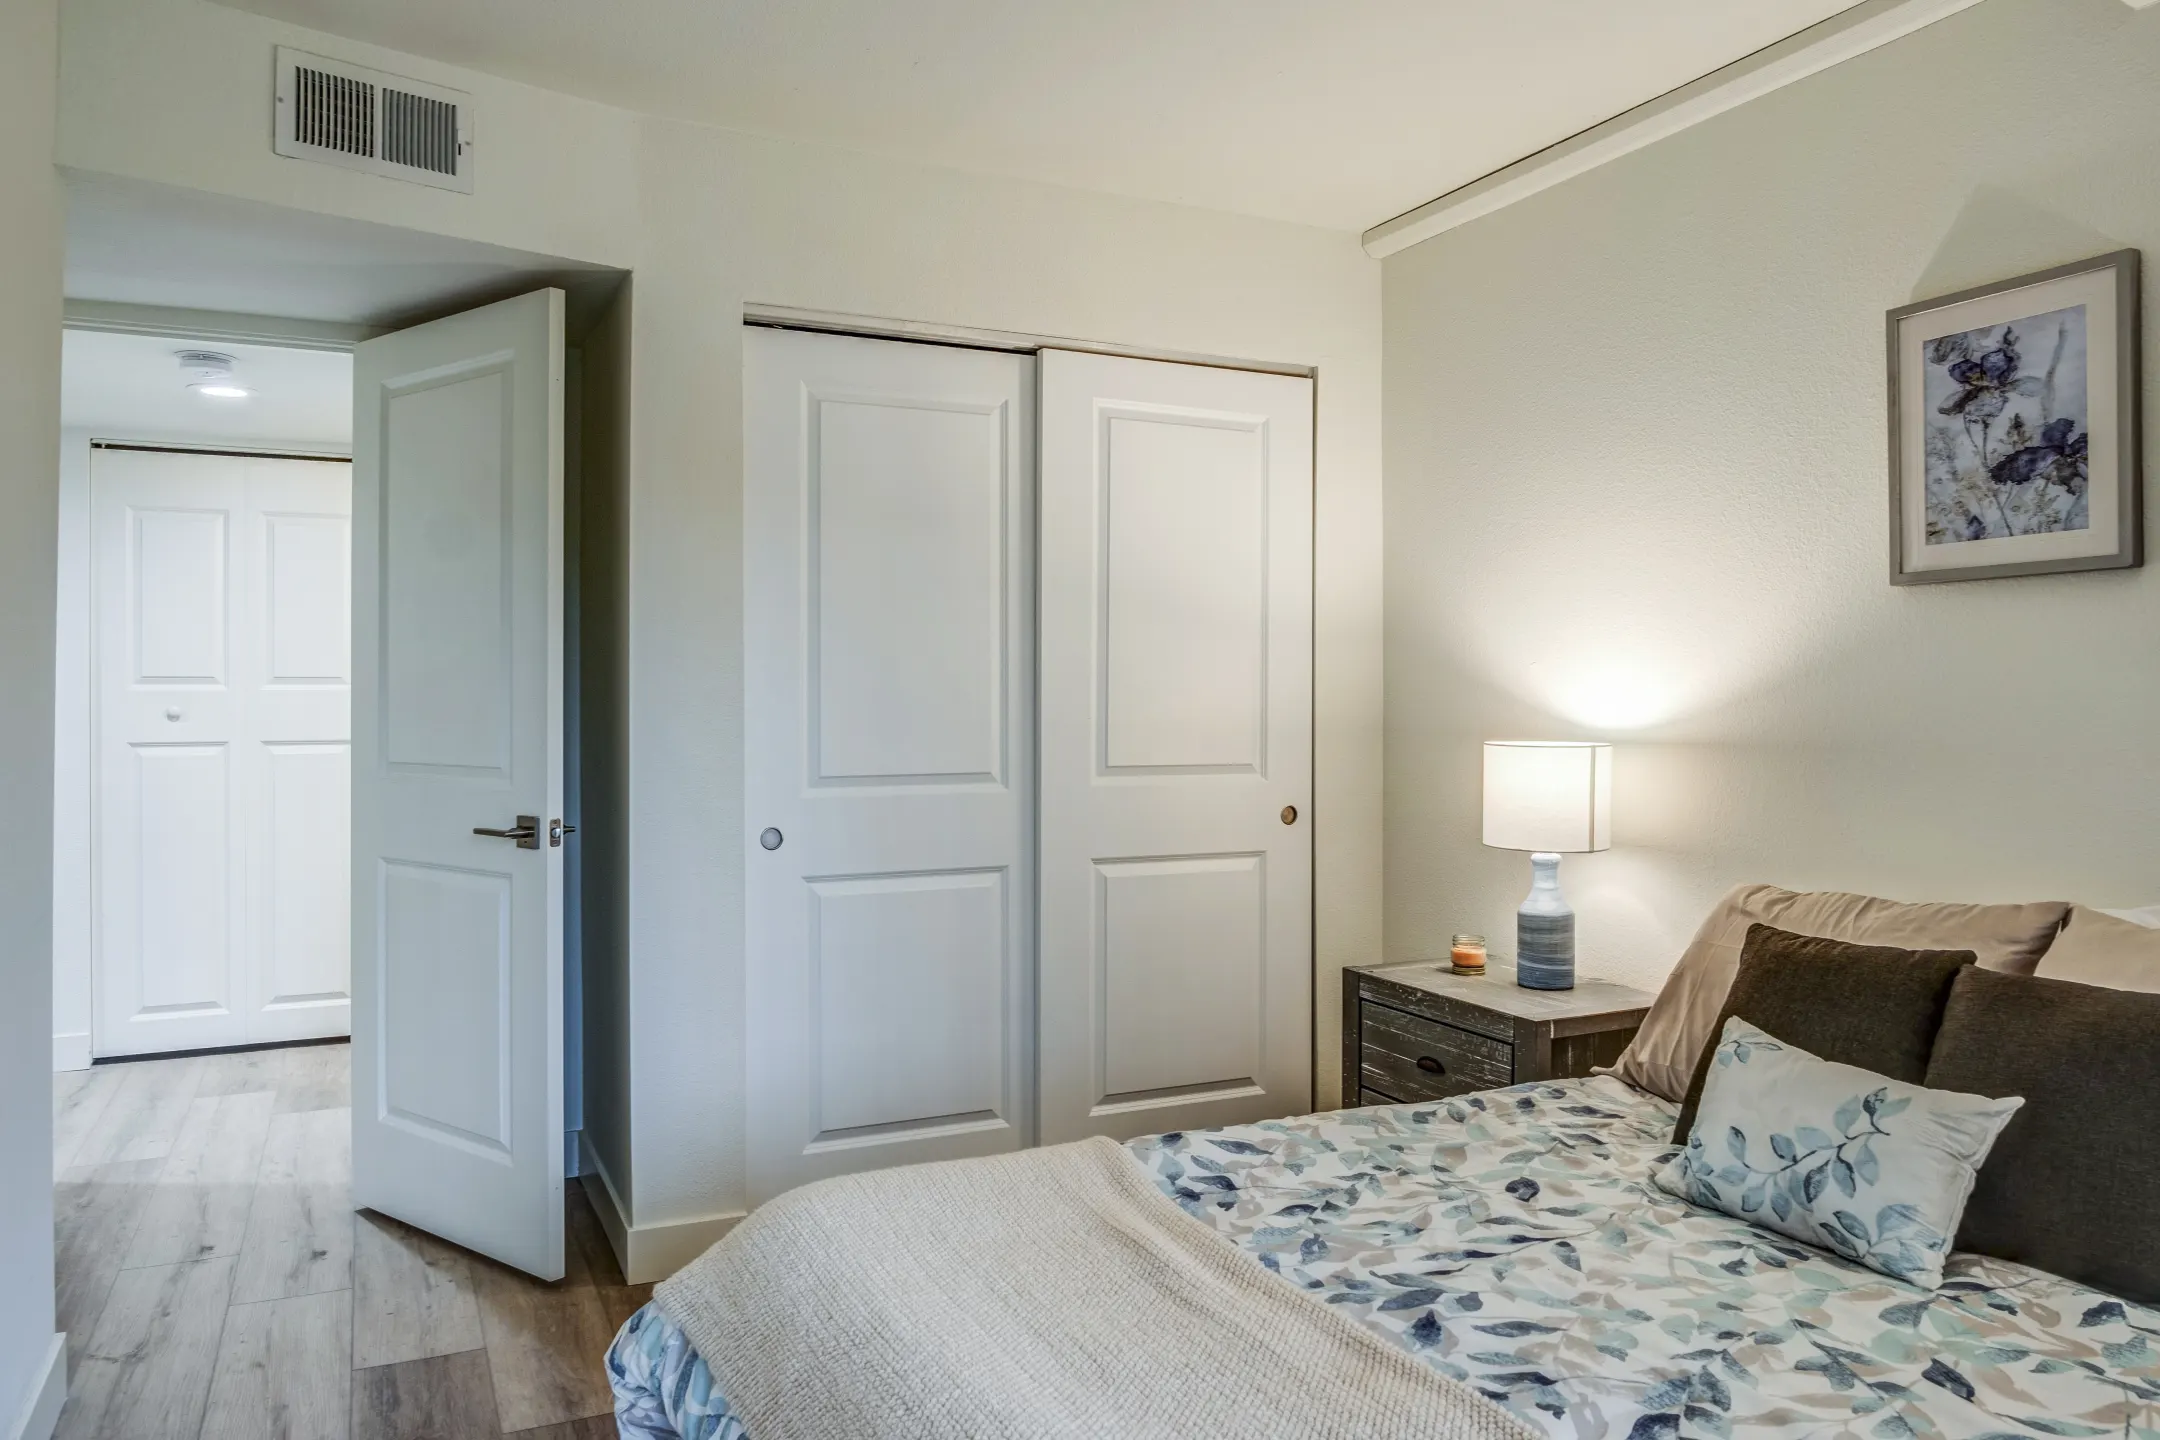 Bedroom - The Crest at Citrus Heights - Citrus Heights, CA